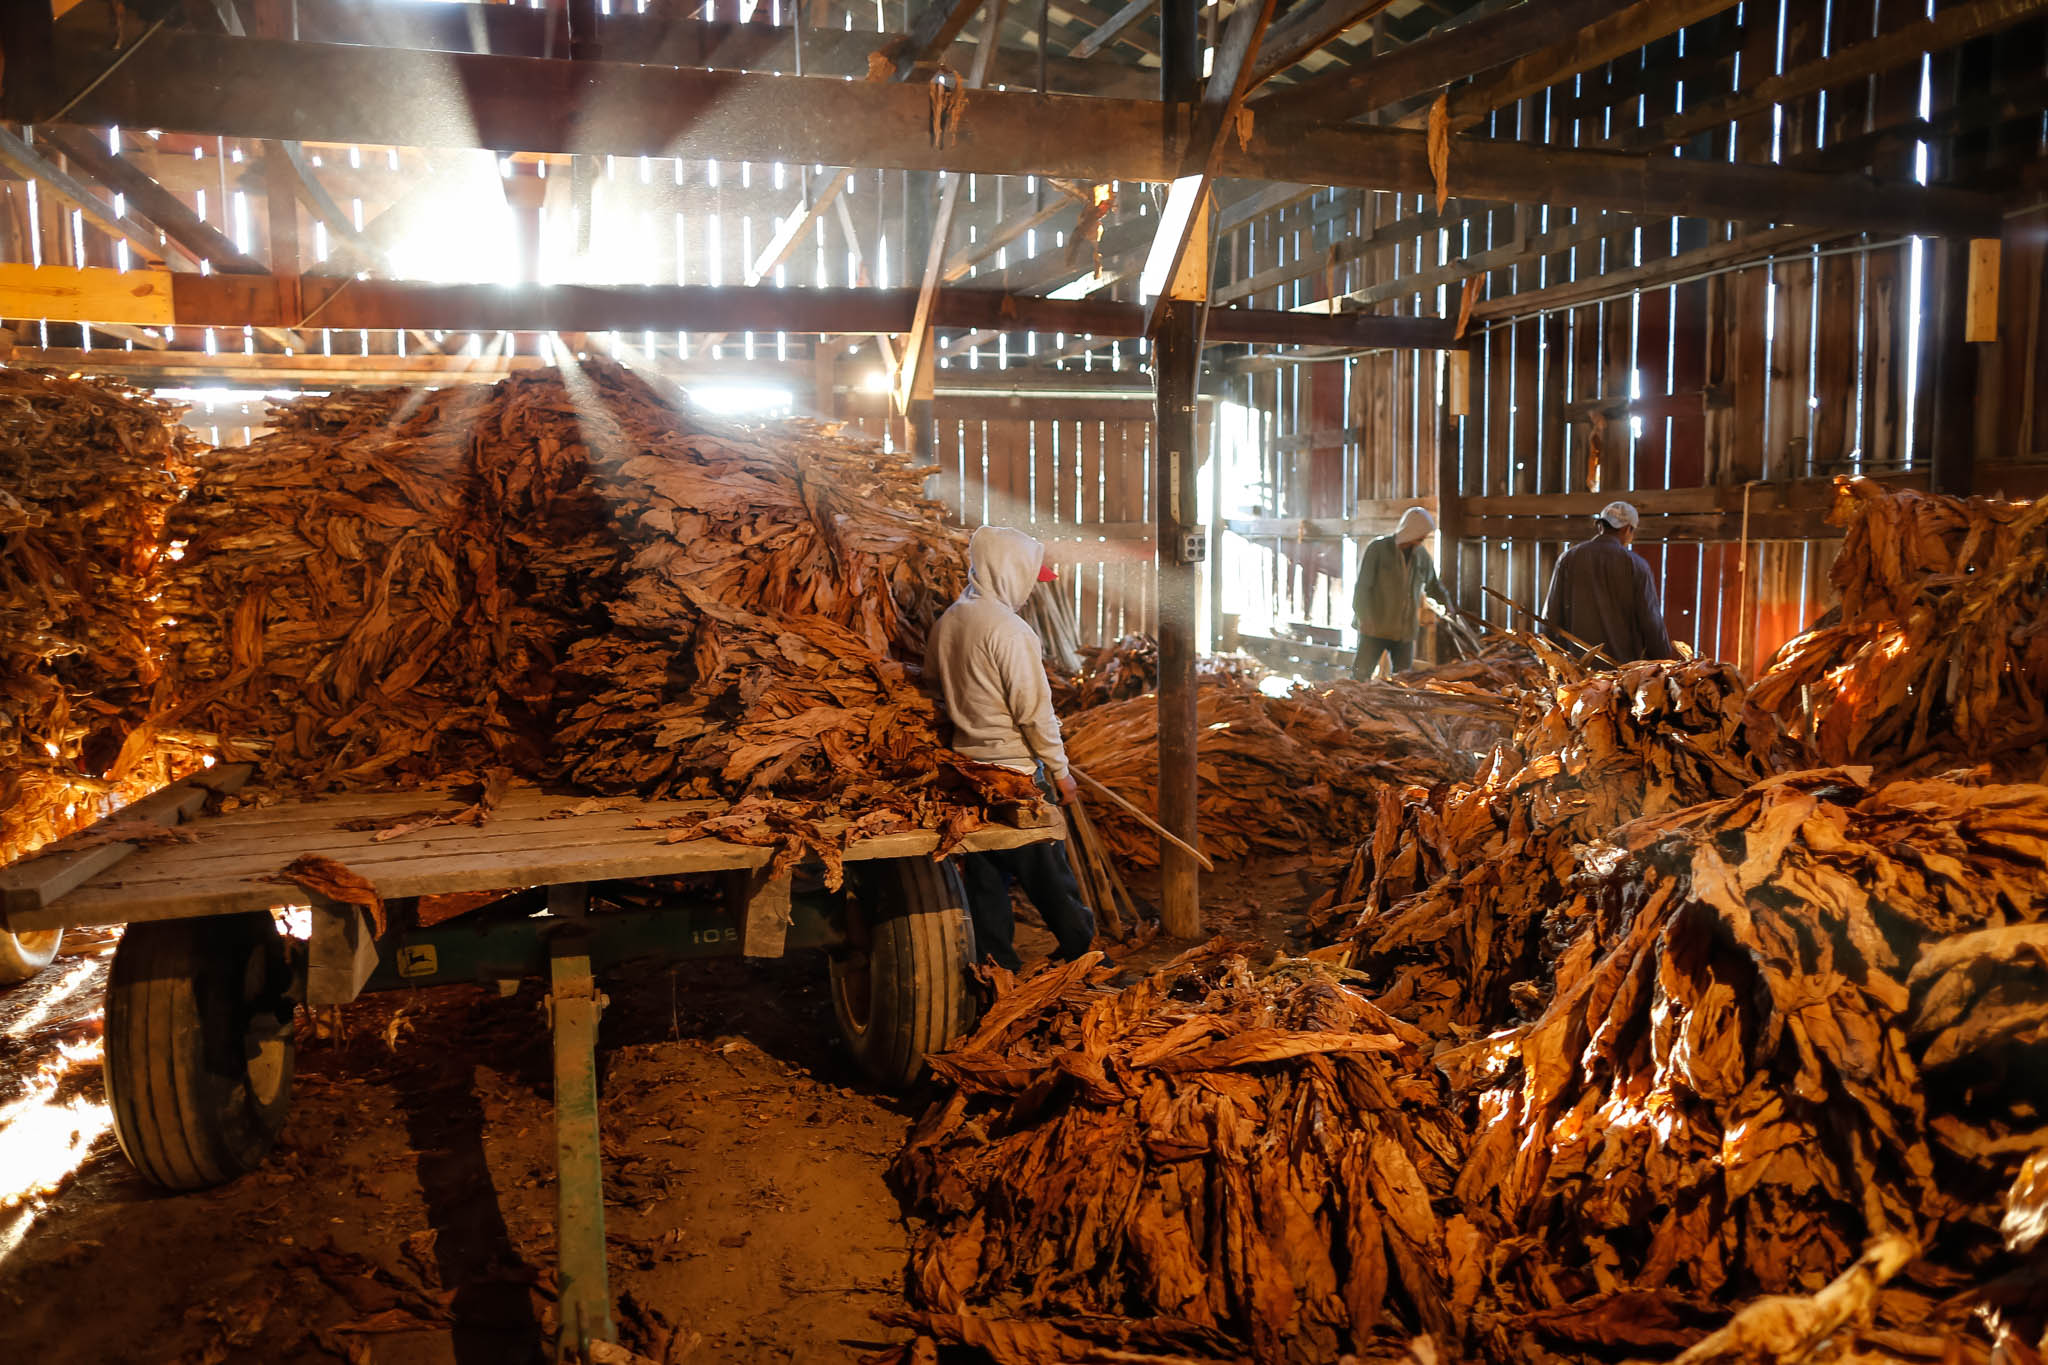  Migrant workers stock pile tobacco stalks as they are taken down from the rafters. 